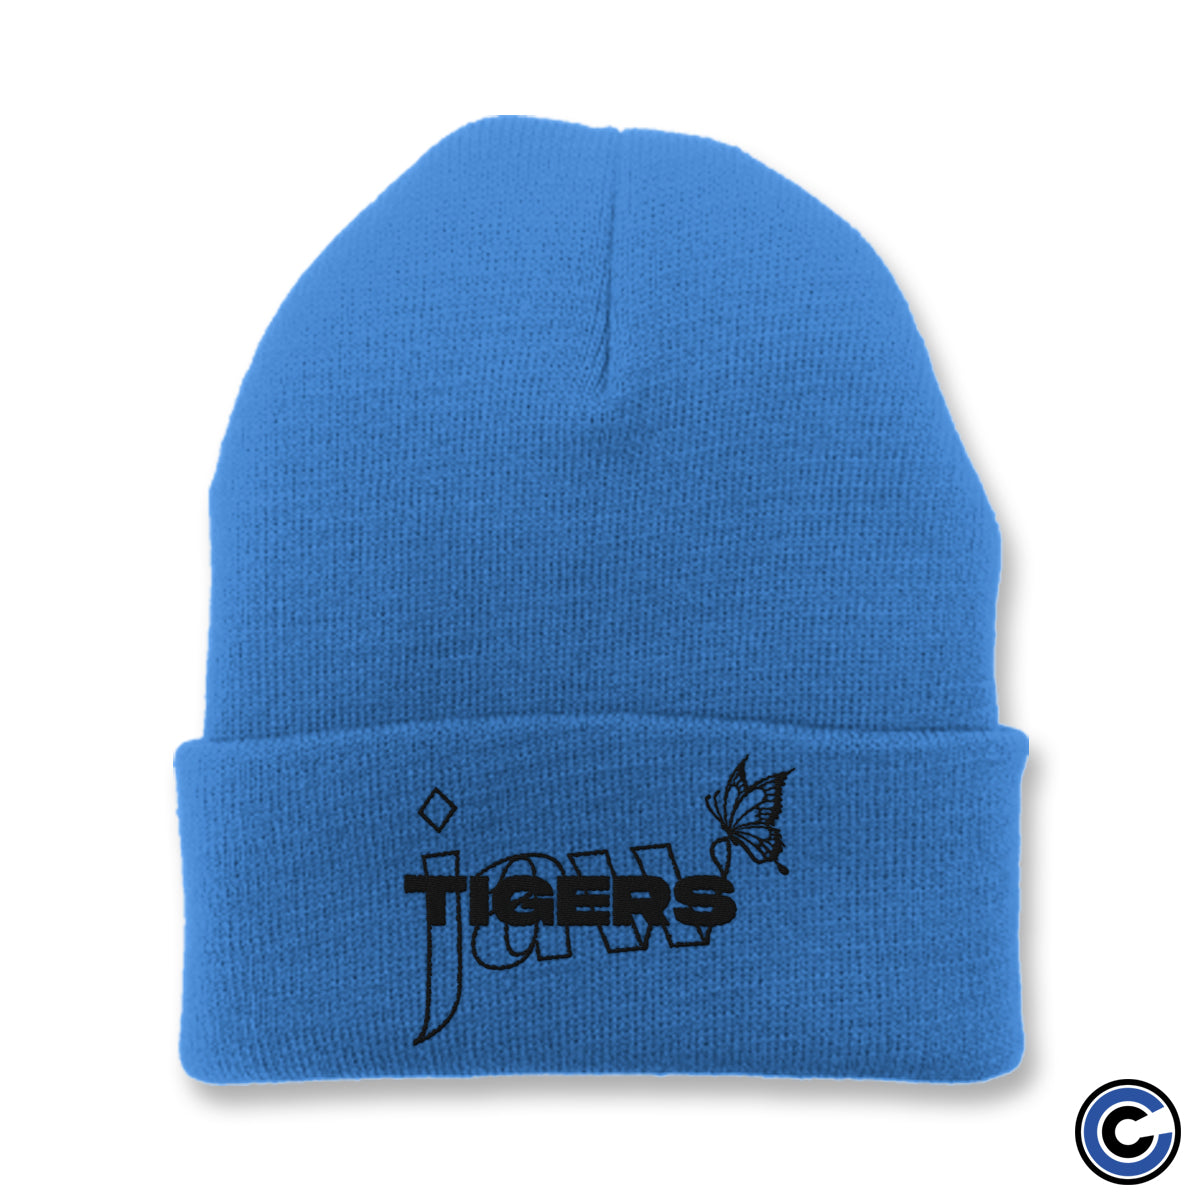 Tigers Jaw "Overlap Blue" Beanie